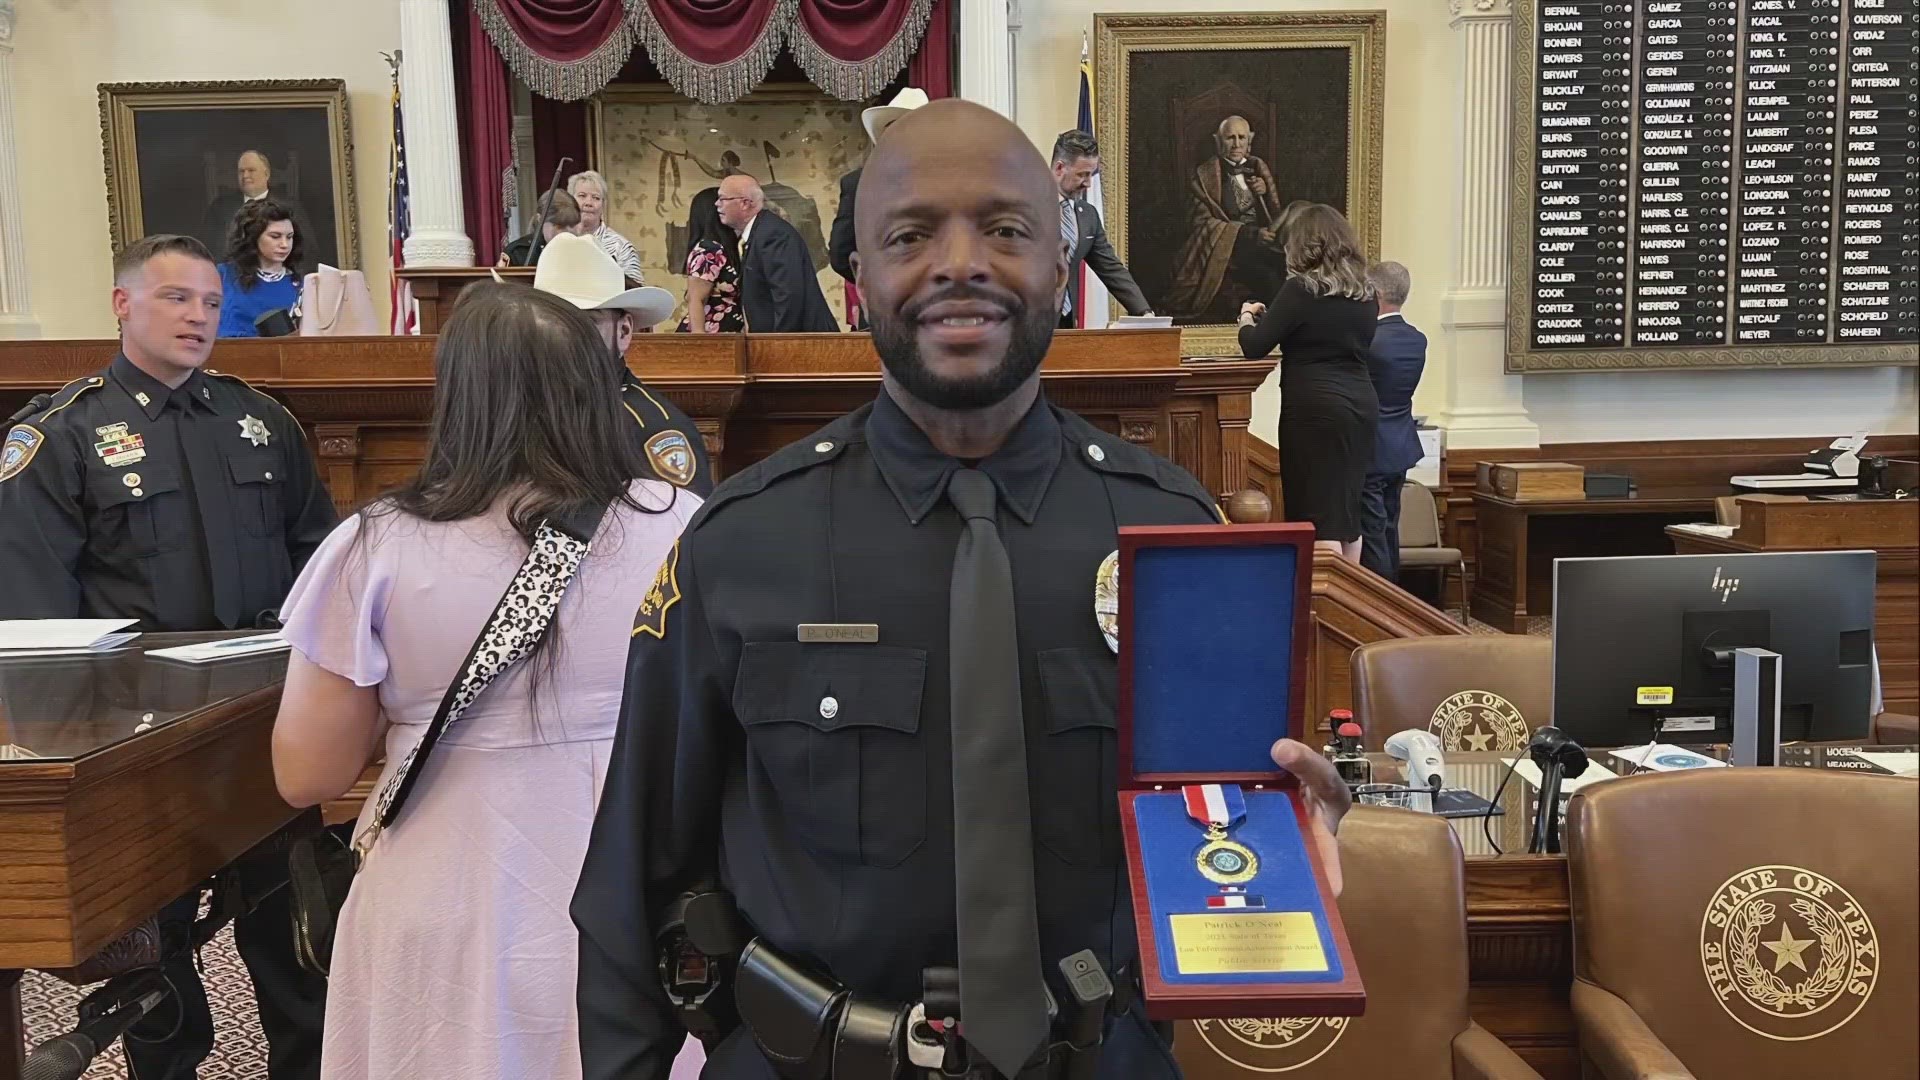 Officer Patrick O’Neal was presented the 2023 State of Texas Law Enforcement Achievement Award for Public Service in the House of Representative Chamber on June 16.